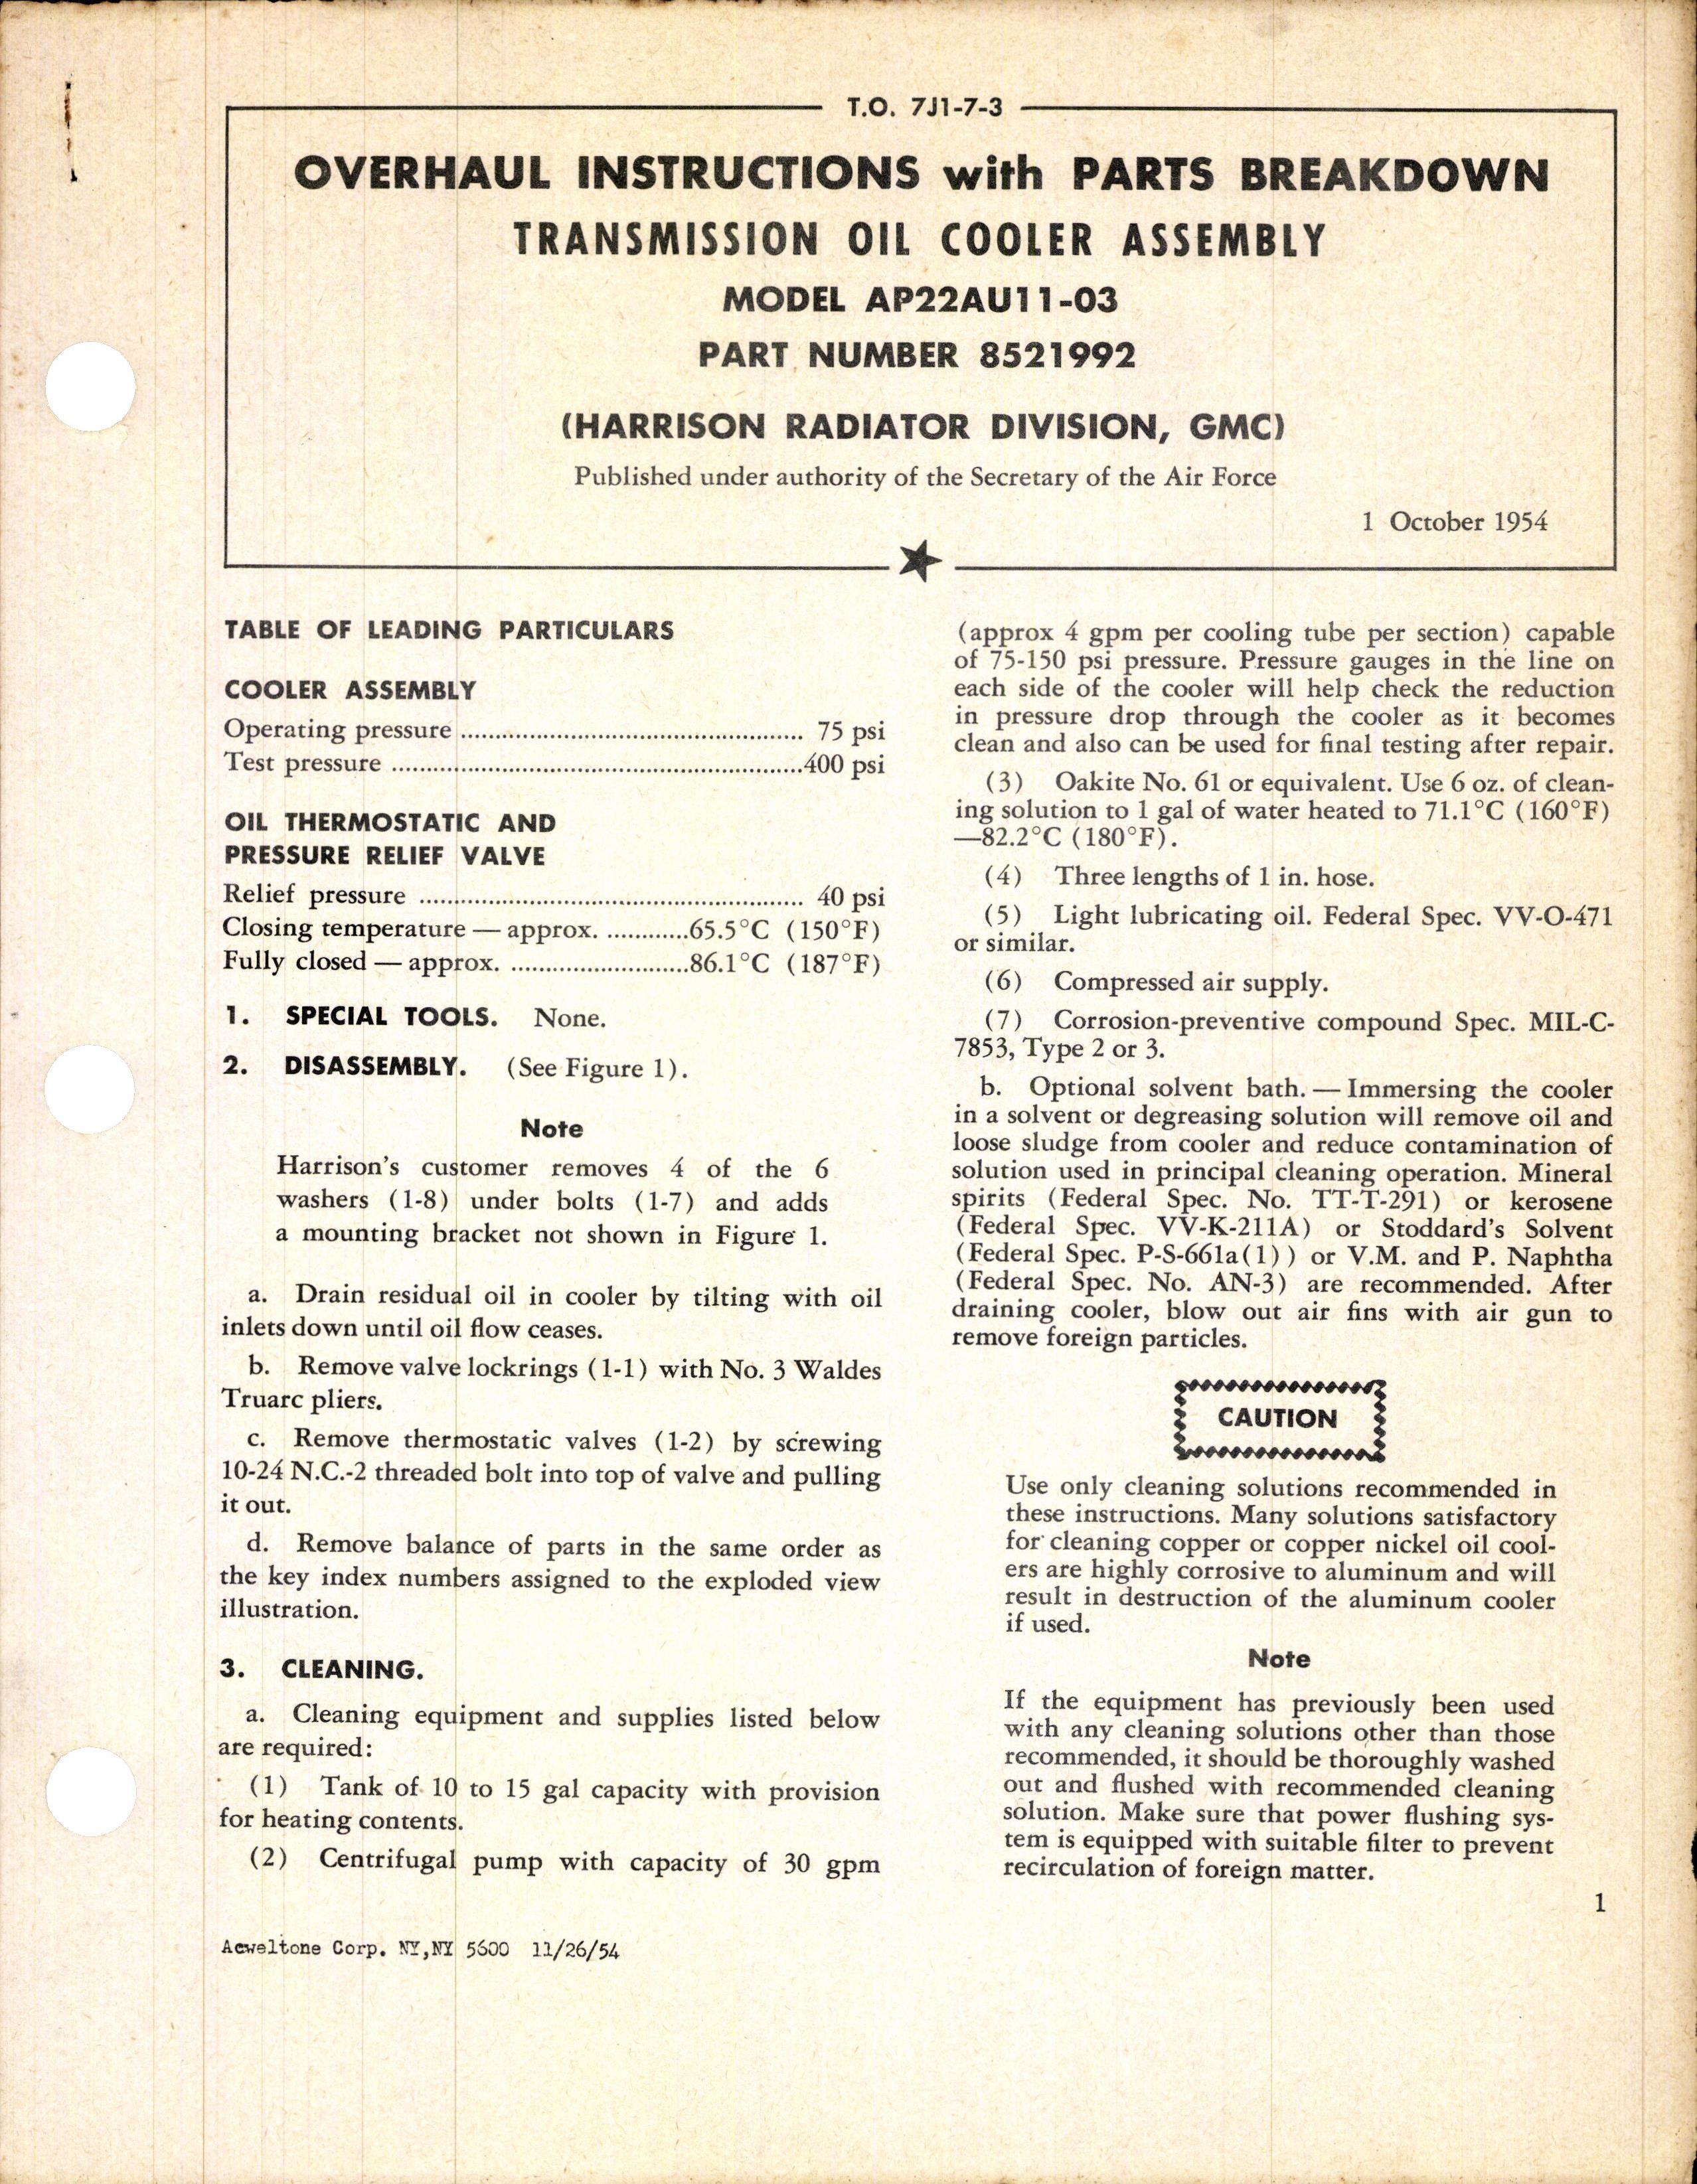 Sample page 1 from AirCorps Library document: Overhaul Instructions with Parts Breakdown Transmission Oil Cooler Assembly